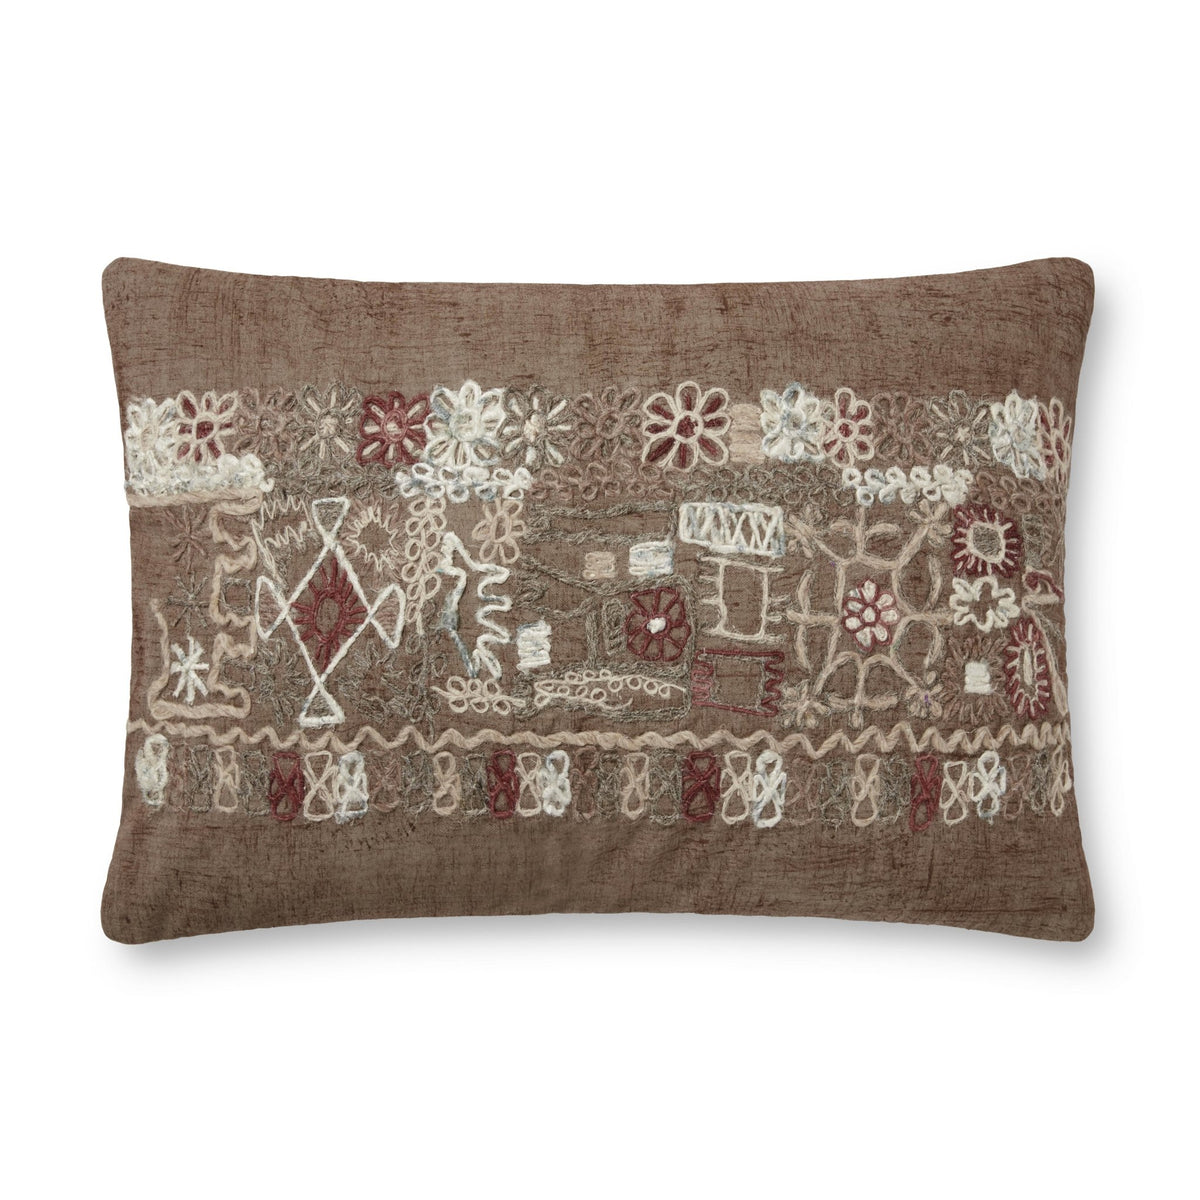 Loloi Pll0003 Taupe/Multi Pillow - Rug & Home